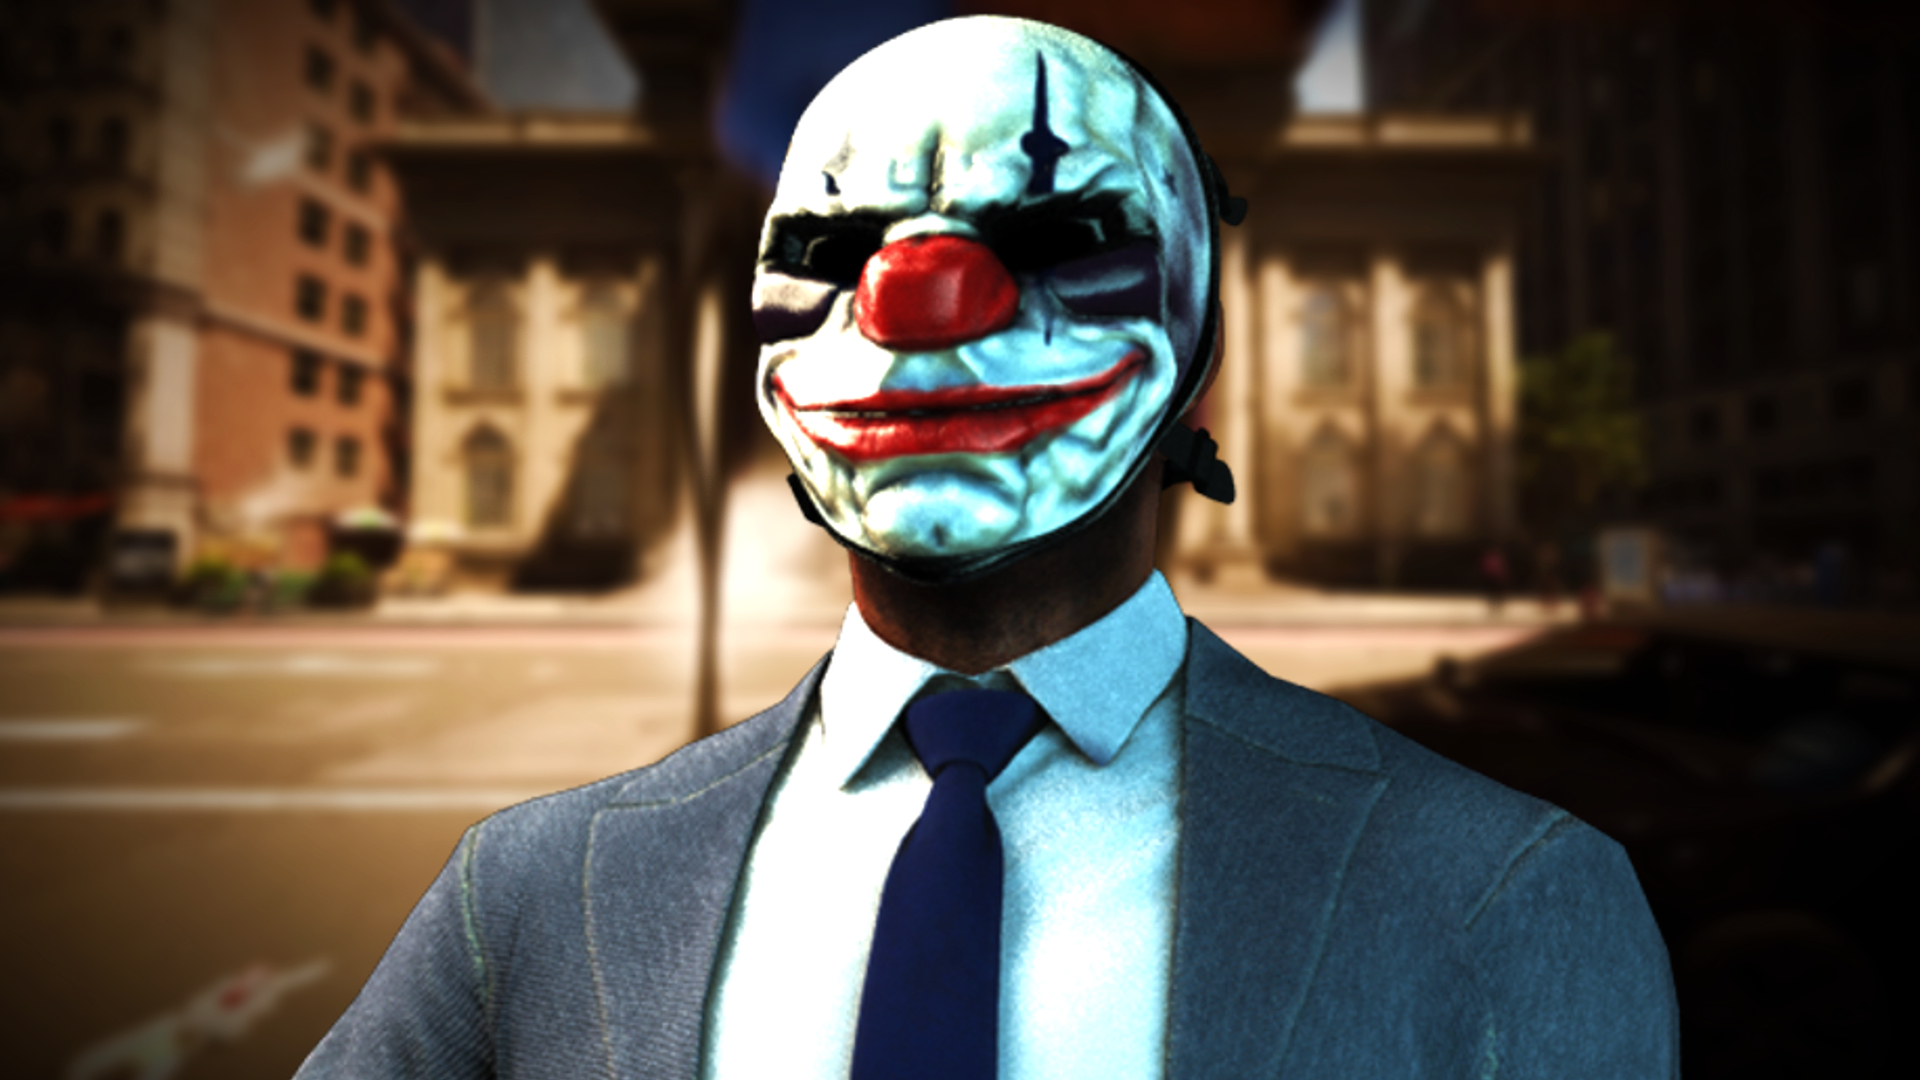 Payday 3 has fixed its server issues and revealed its post-launch